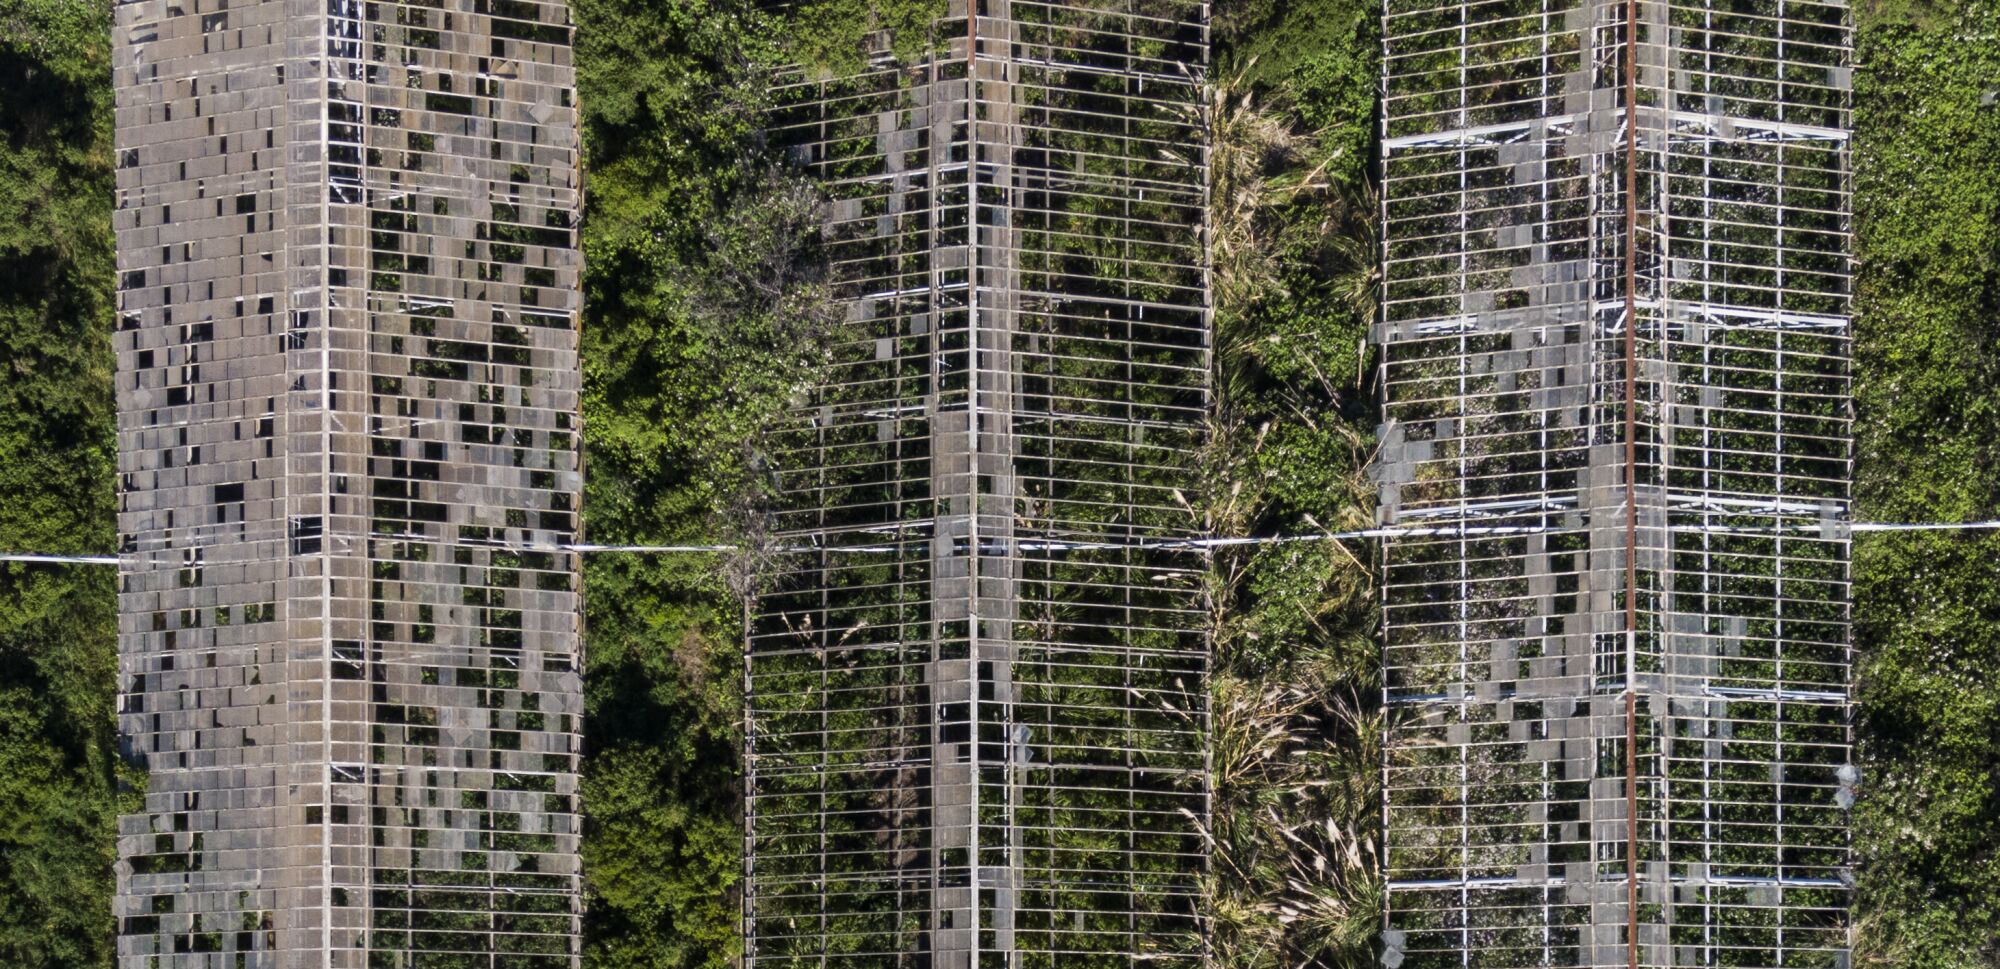 An aerial view of greenhouses with missing roof panels